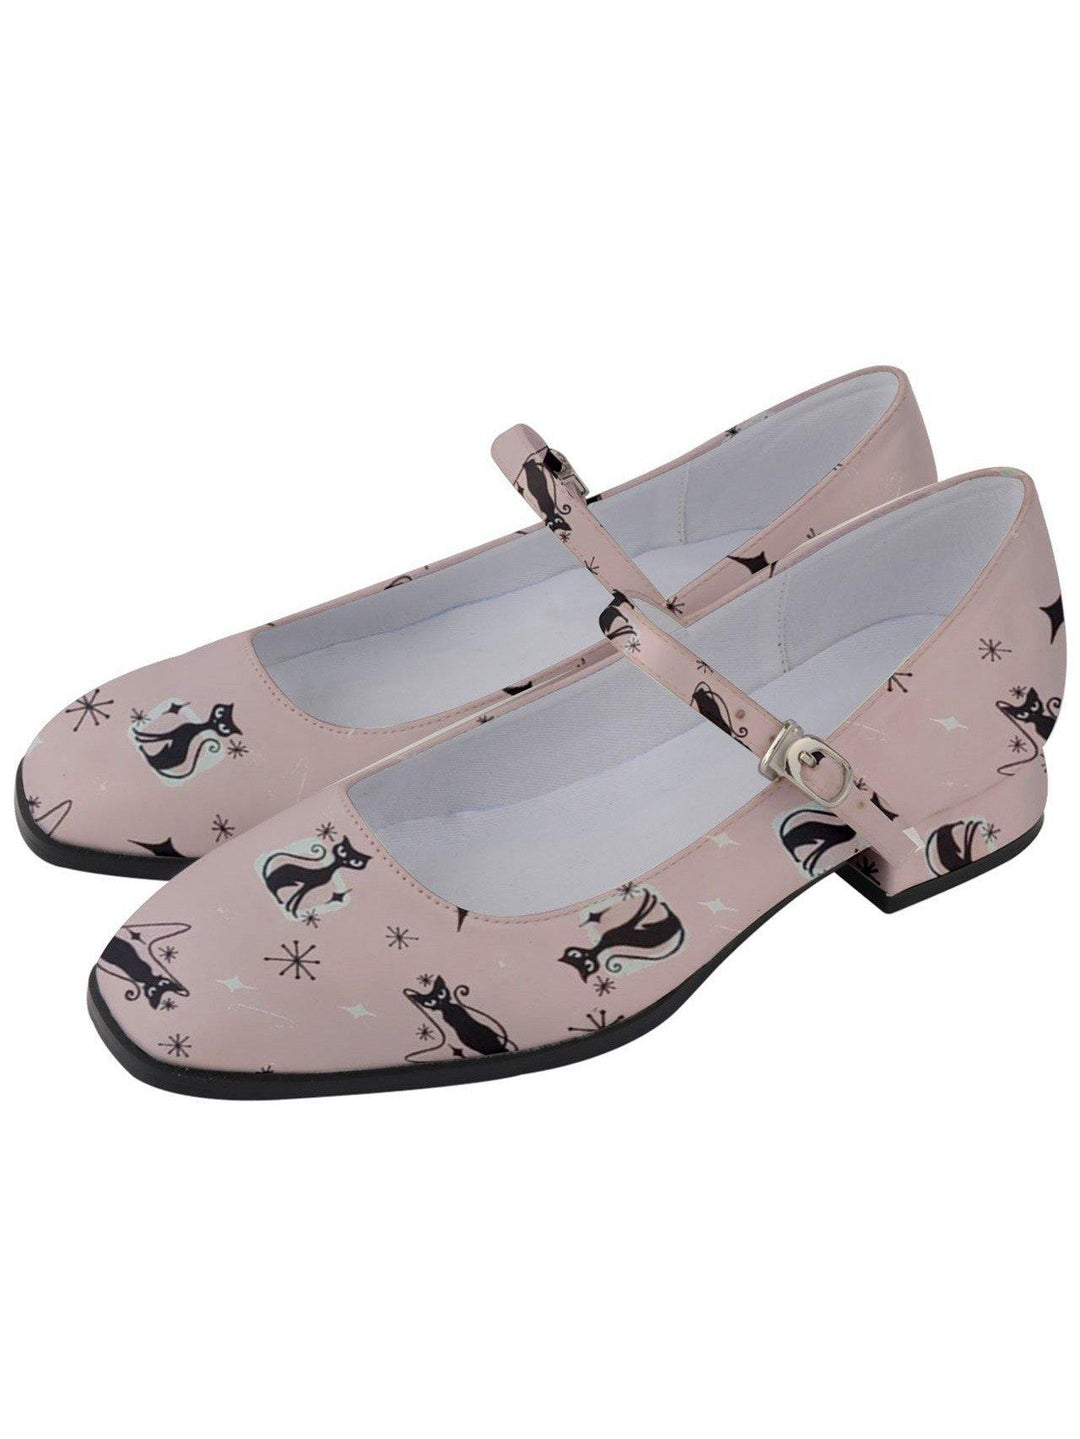 What's New Pussycat Women's Mary Jane Shoes [IN STOCK]